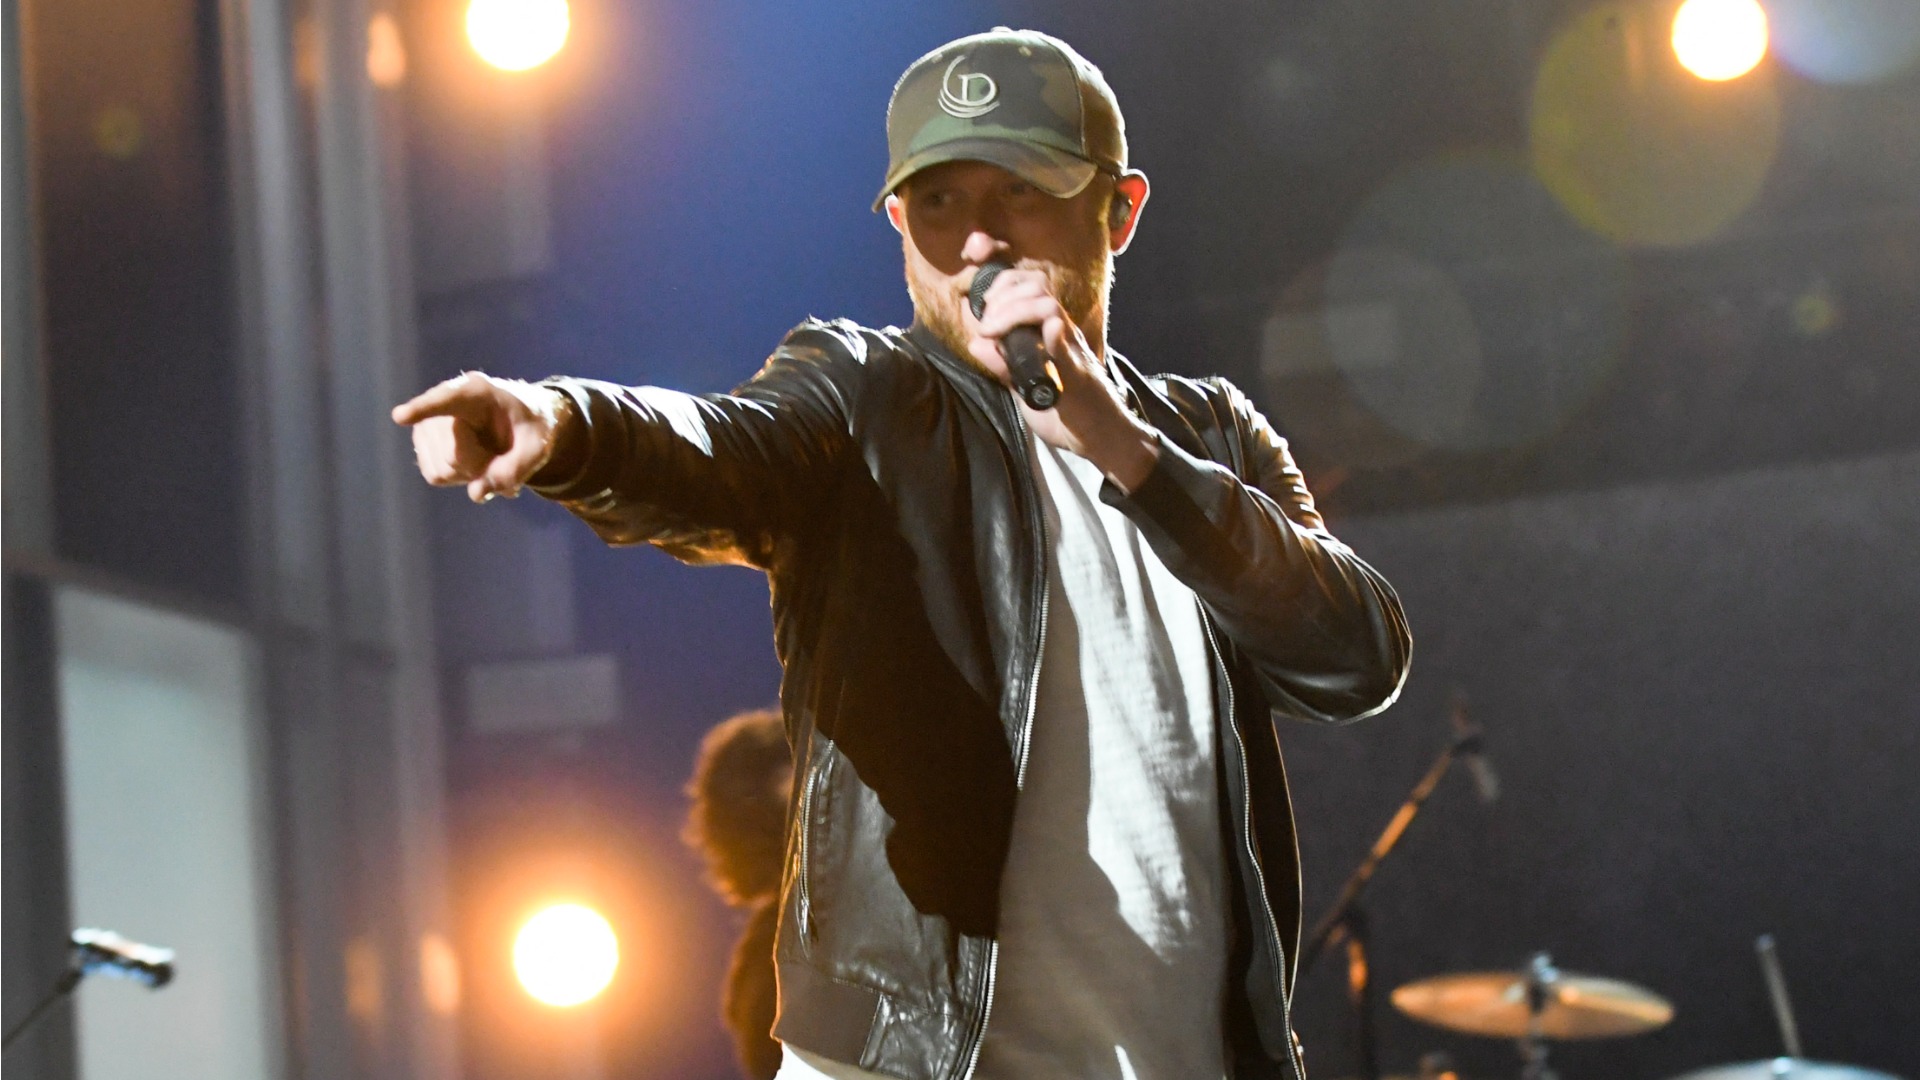 We'd just like to point out that we can't wait for Cole Swindell's performance.